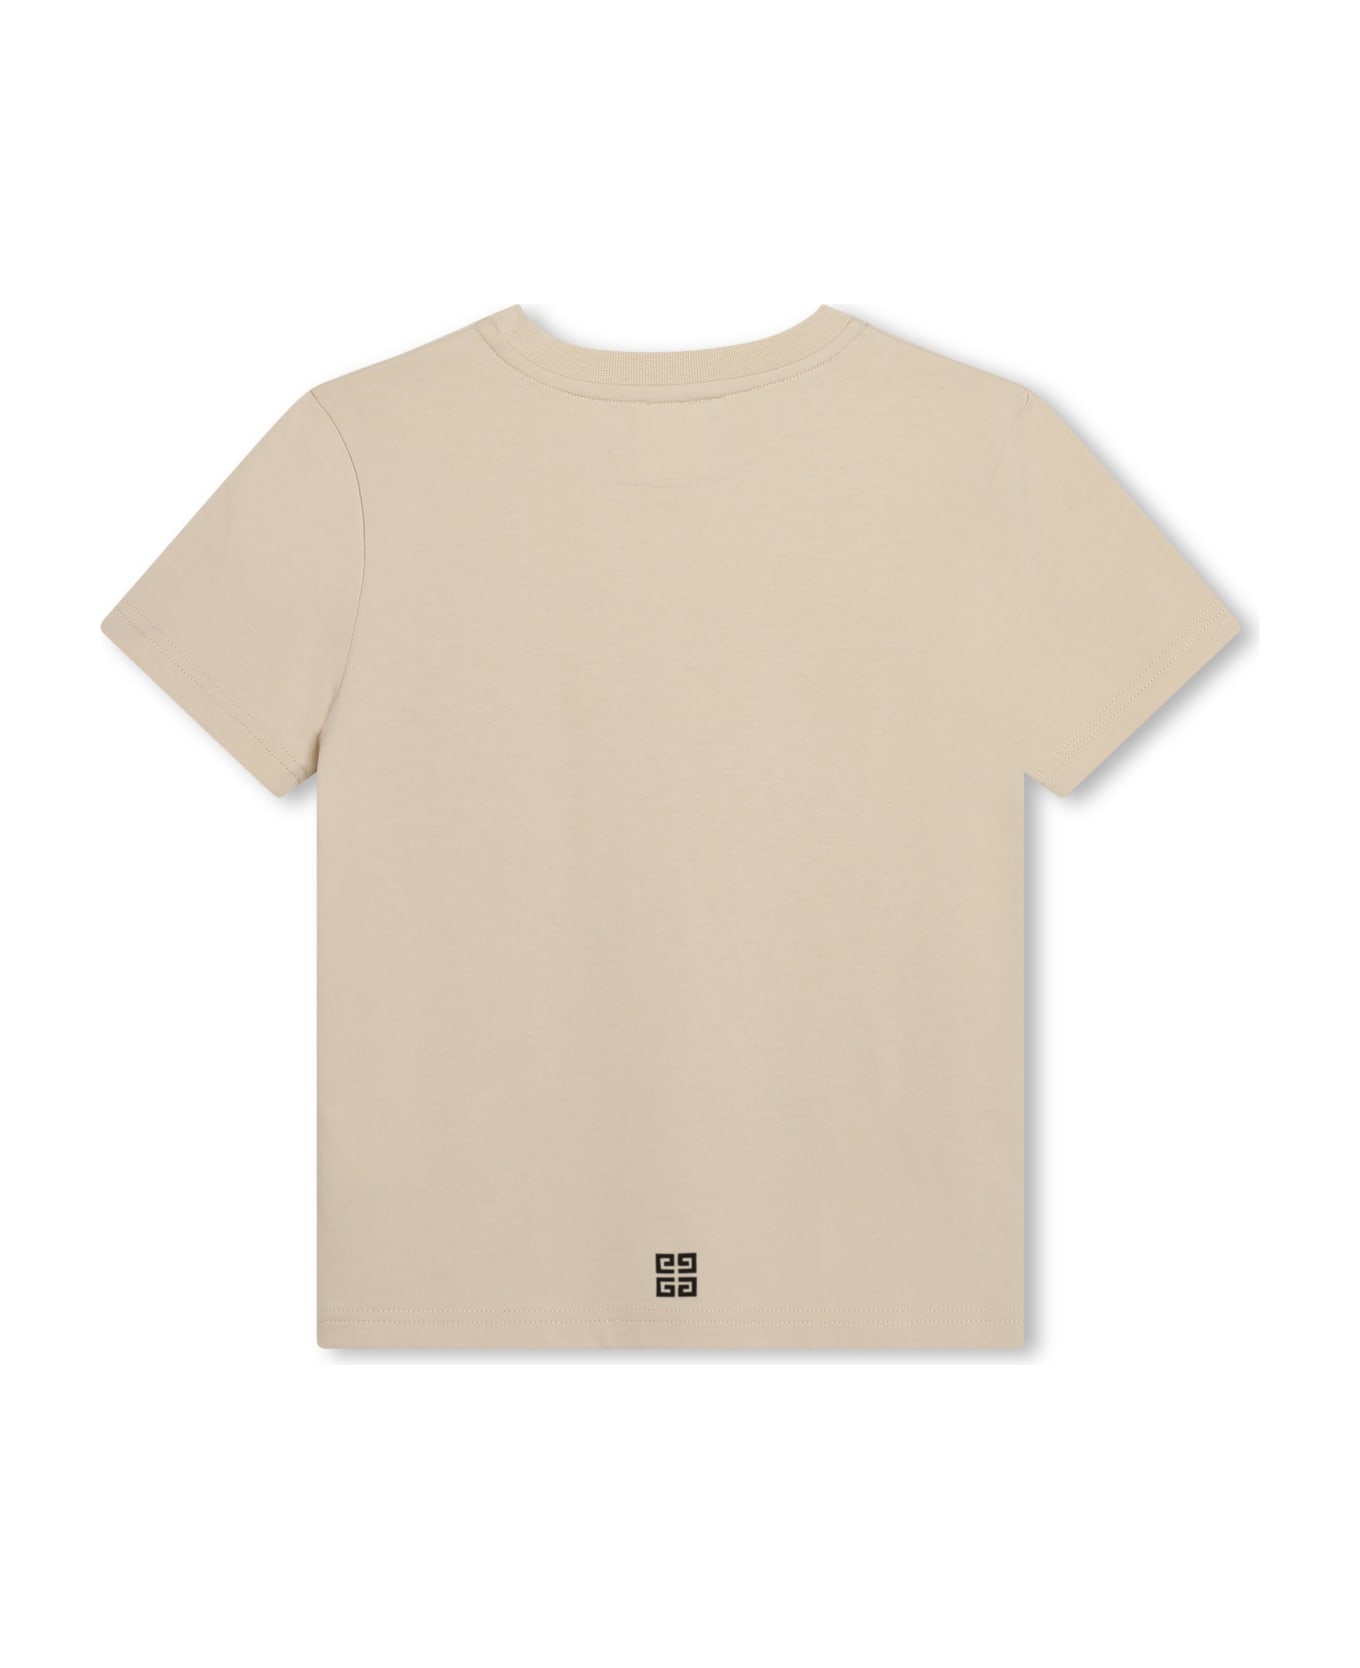 Givenchy T-shirt Con Logo - Beige